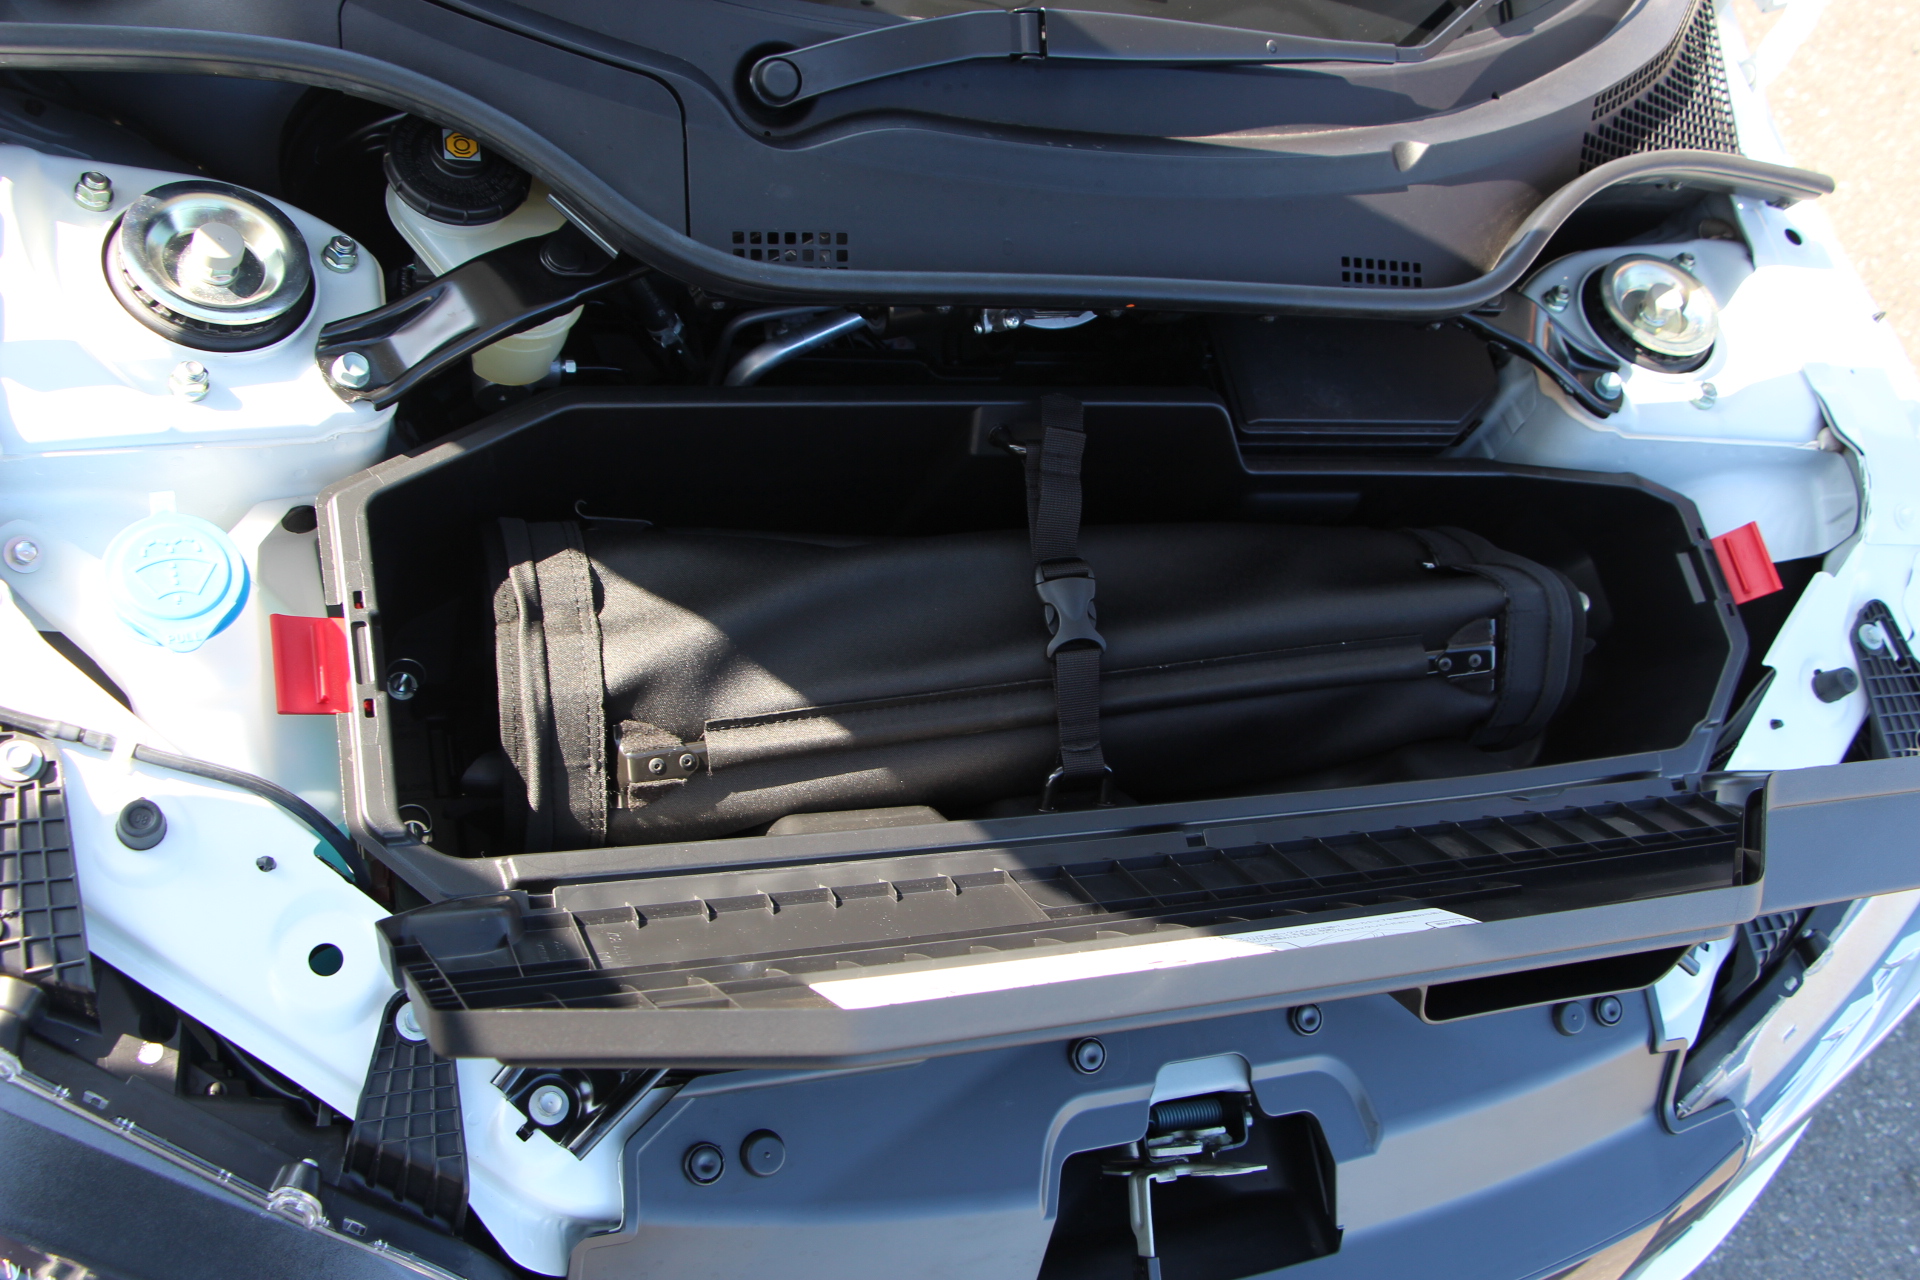 Rag-top detaches completely and rolls-up into the front 'boot' space...